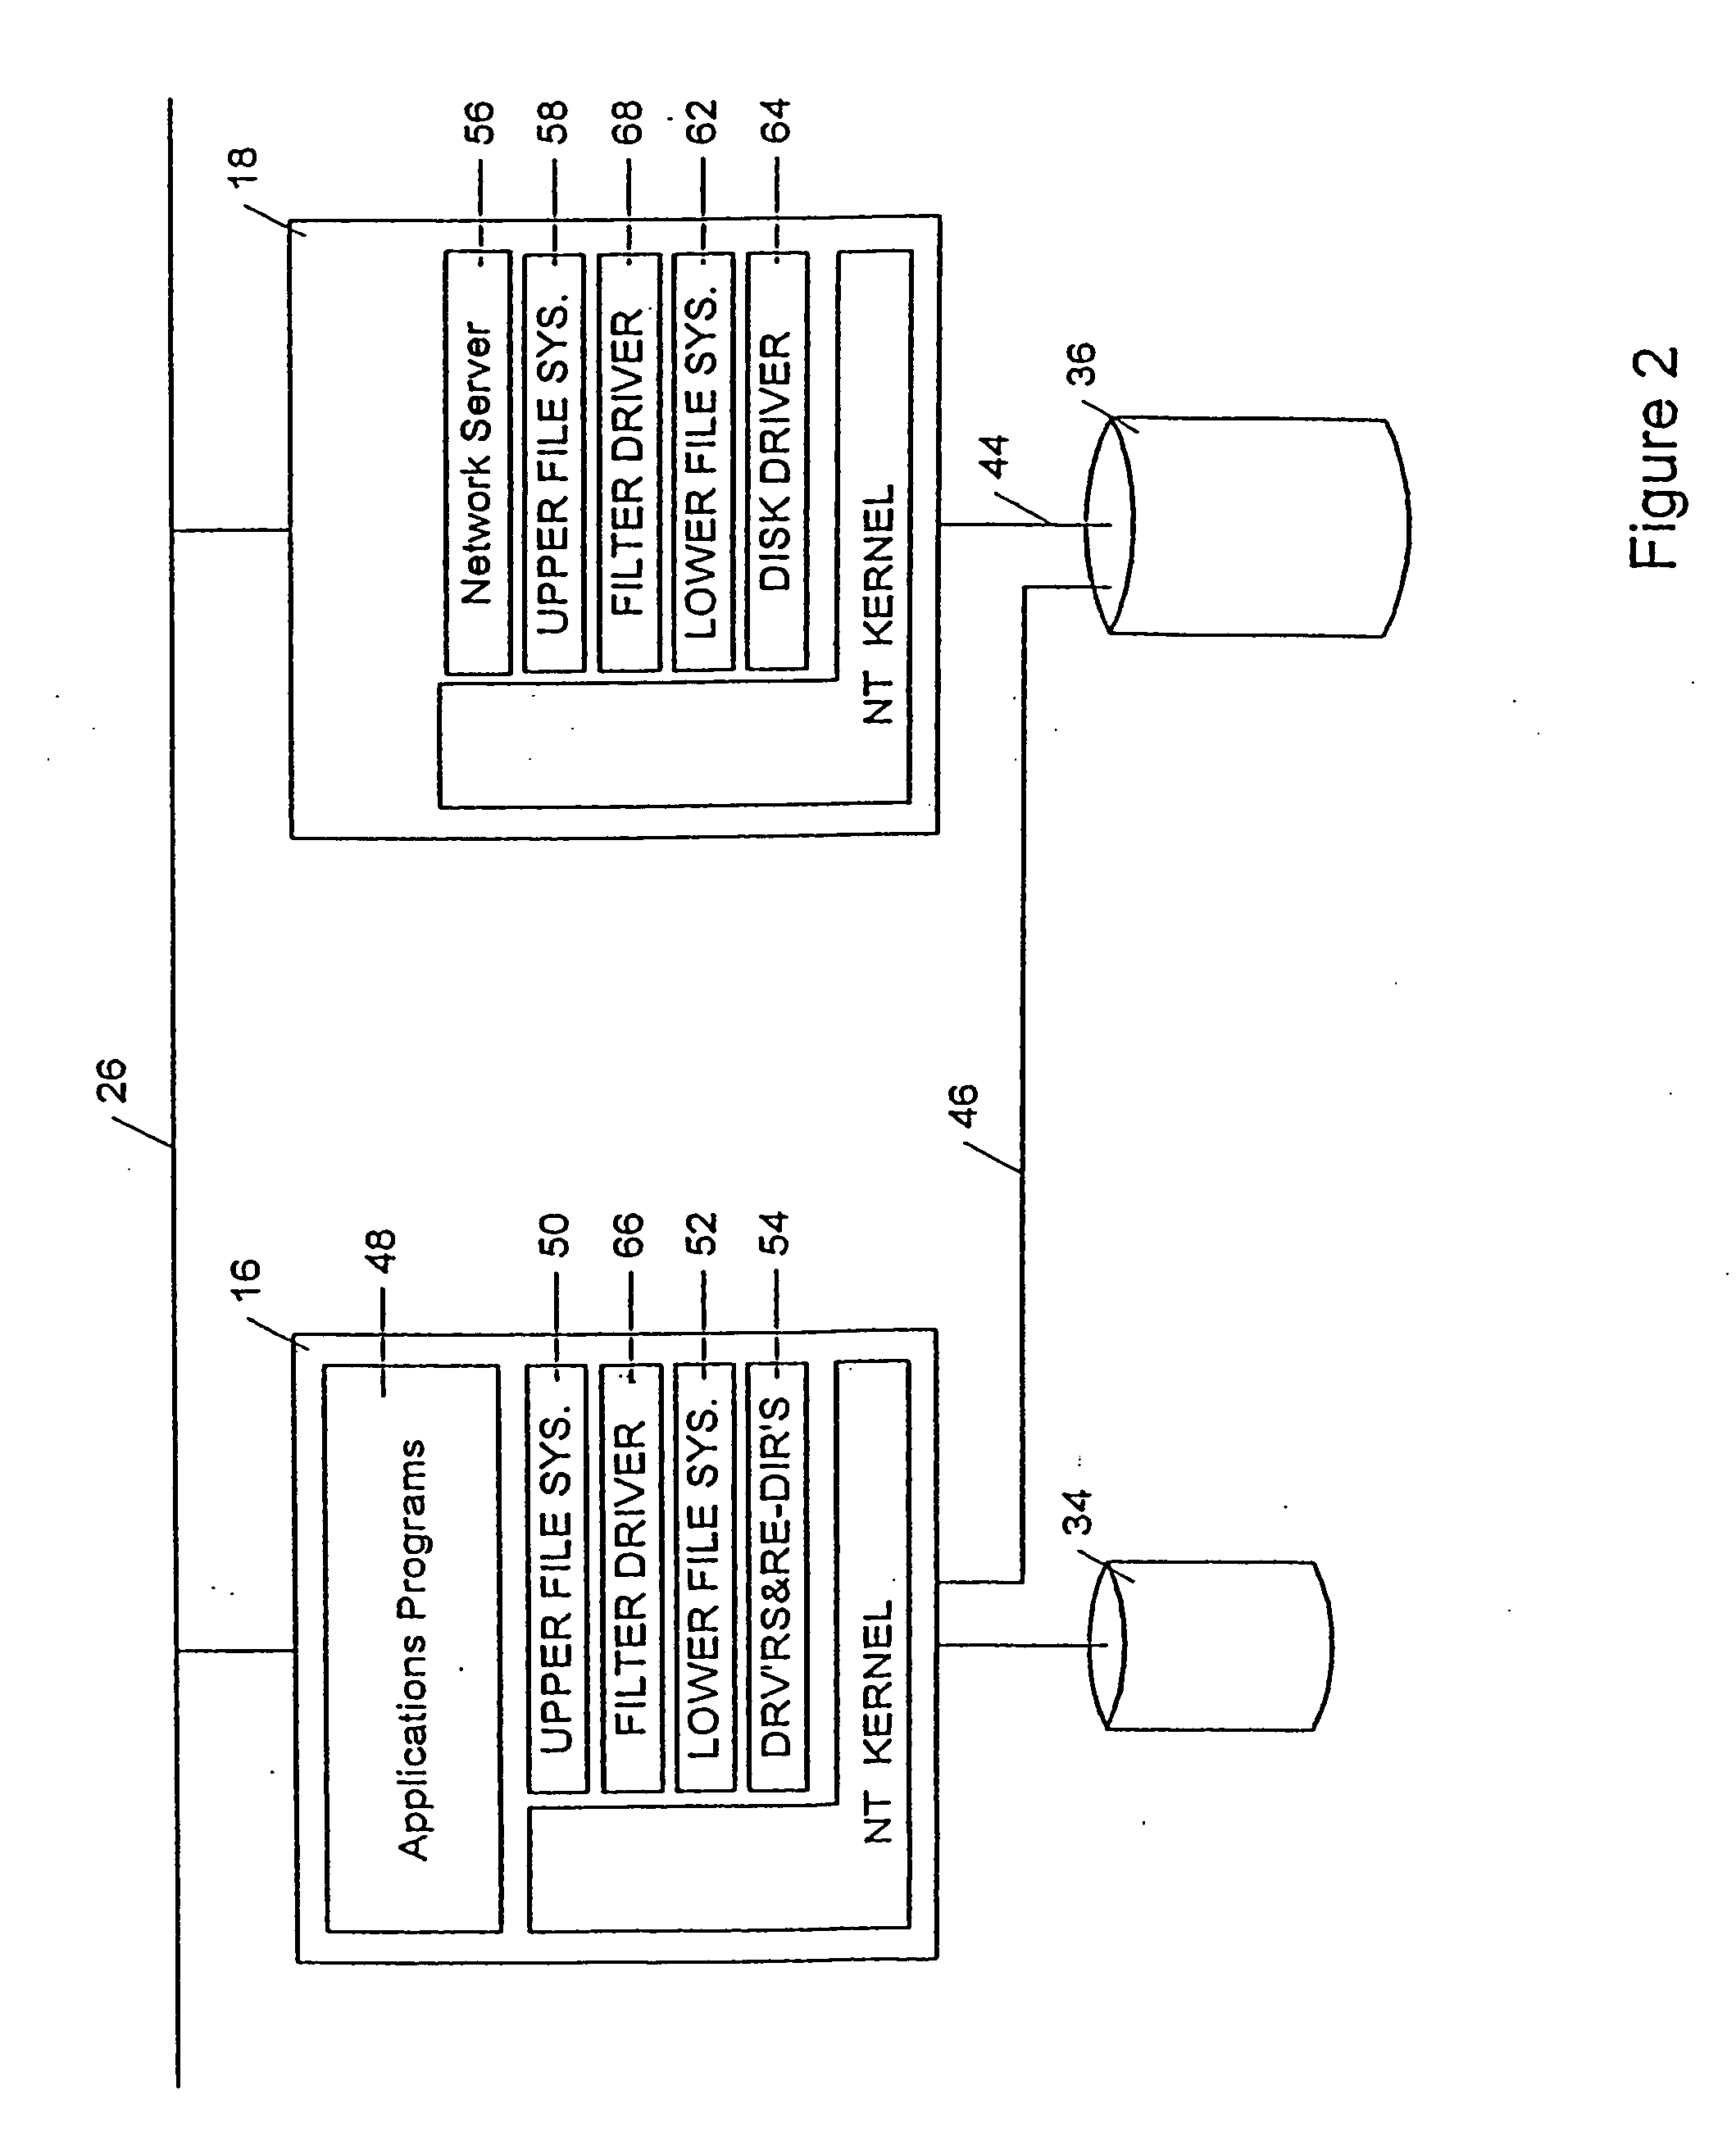 Methods and apparatus for high-speed access to and sharing of storage devices on a networked digital data processing system